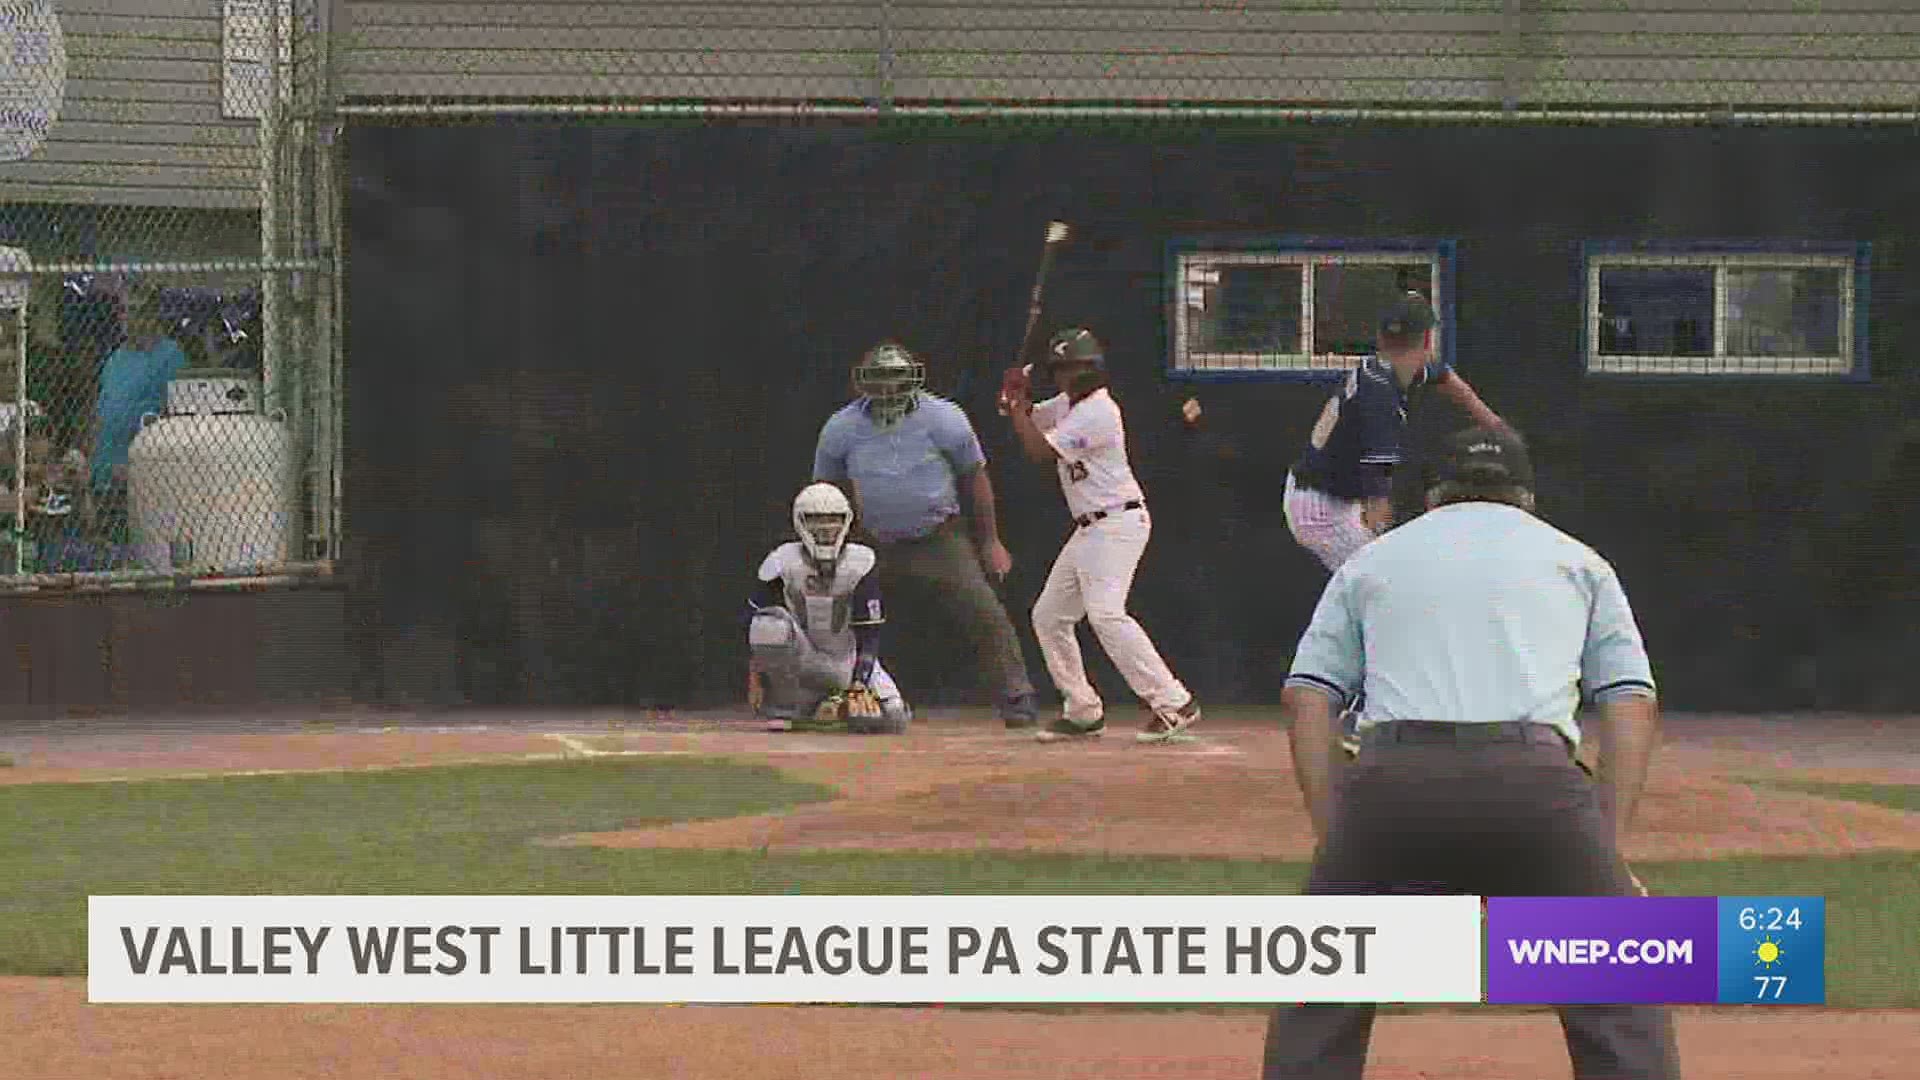 The Pennsylvania State Little League Baseball Tournament Finishing Up At Valley West LL.